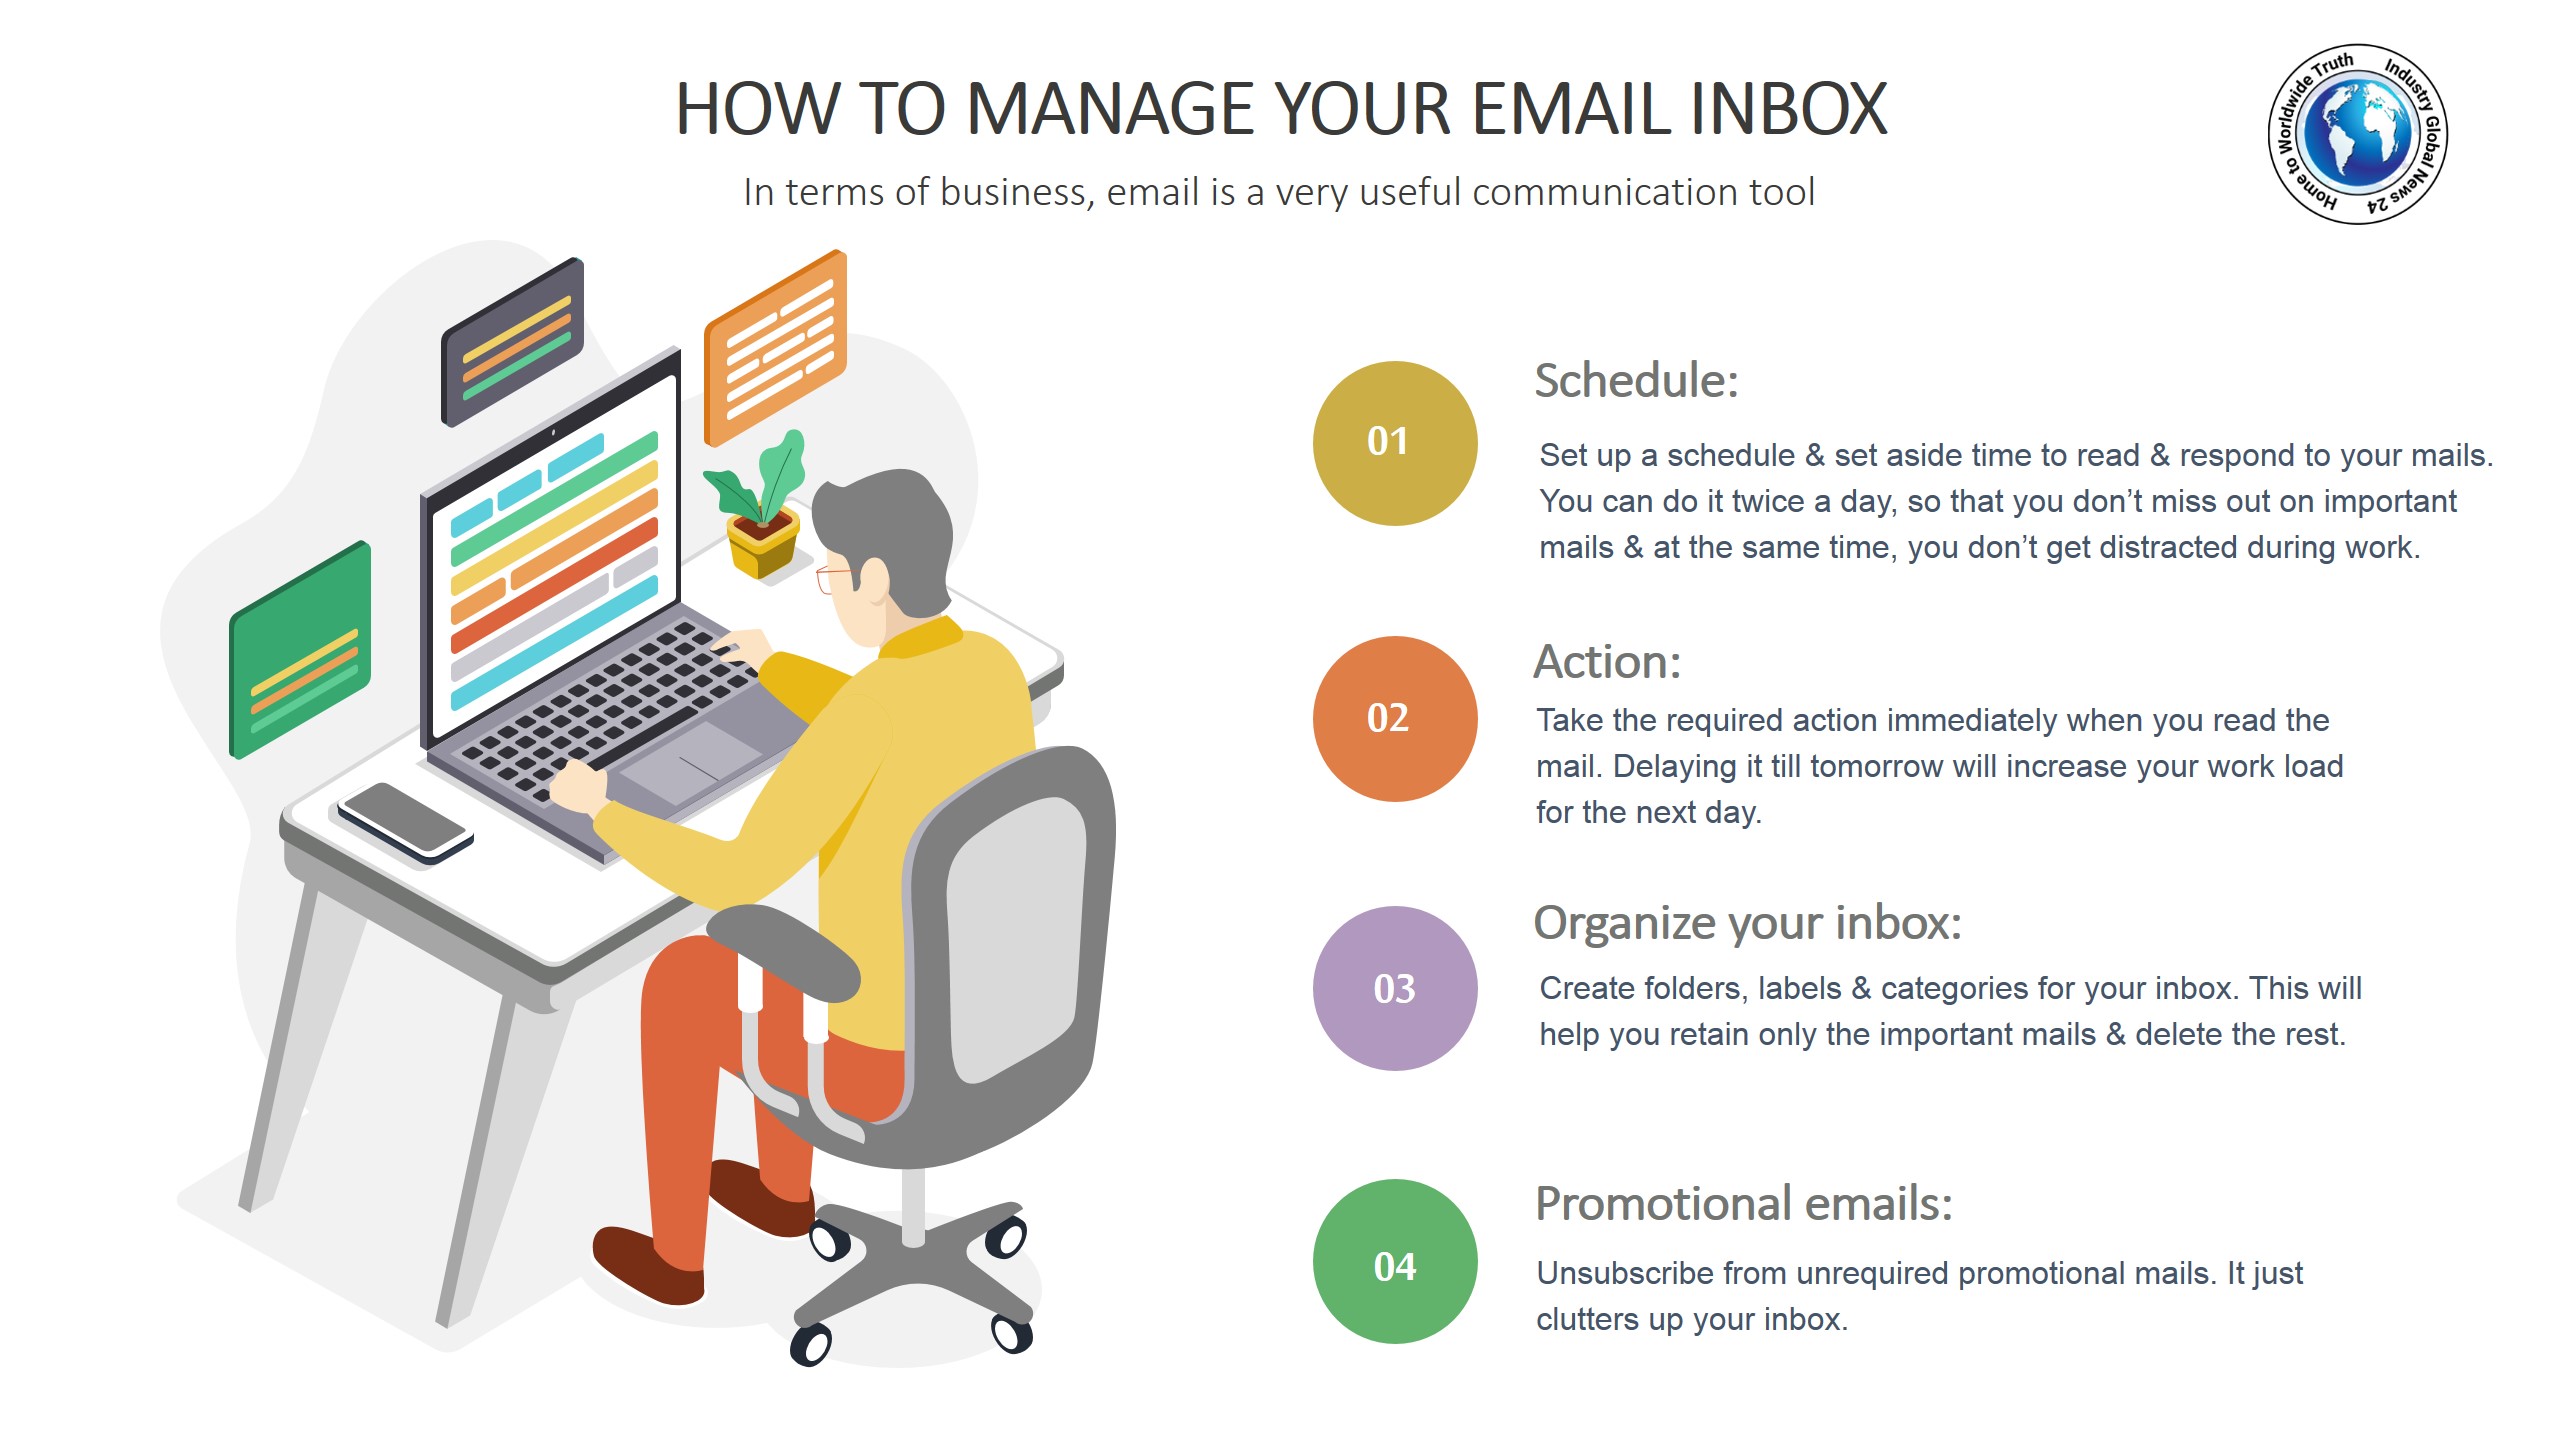 How to manage your email inbox